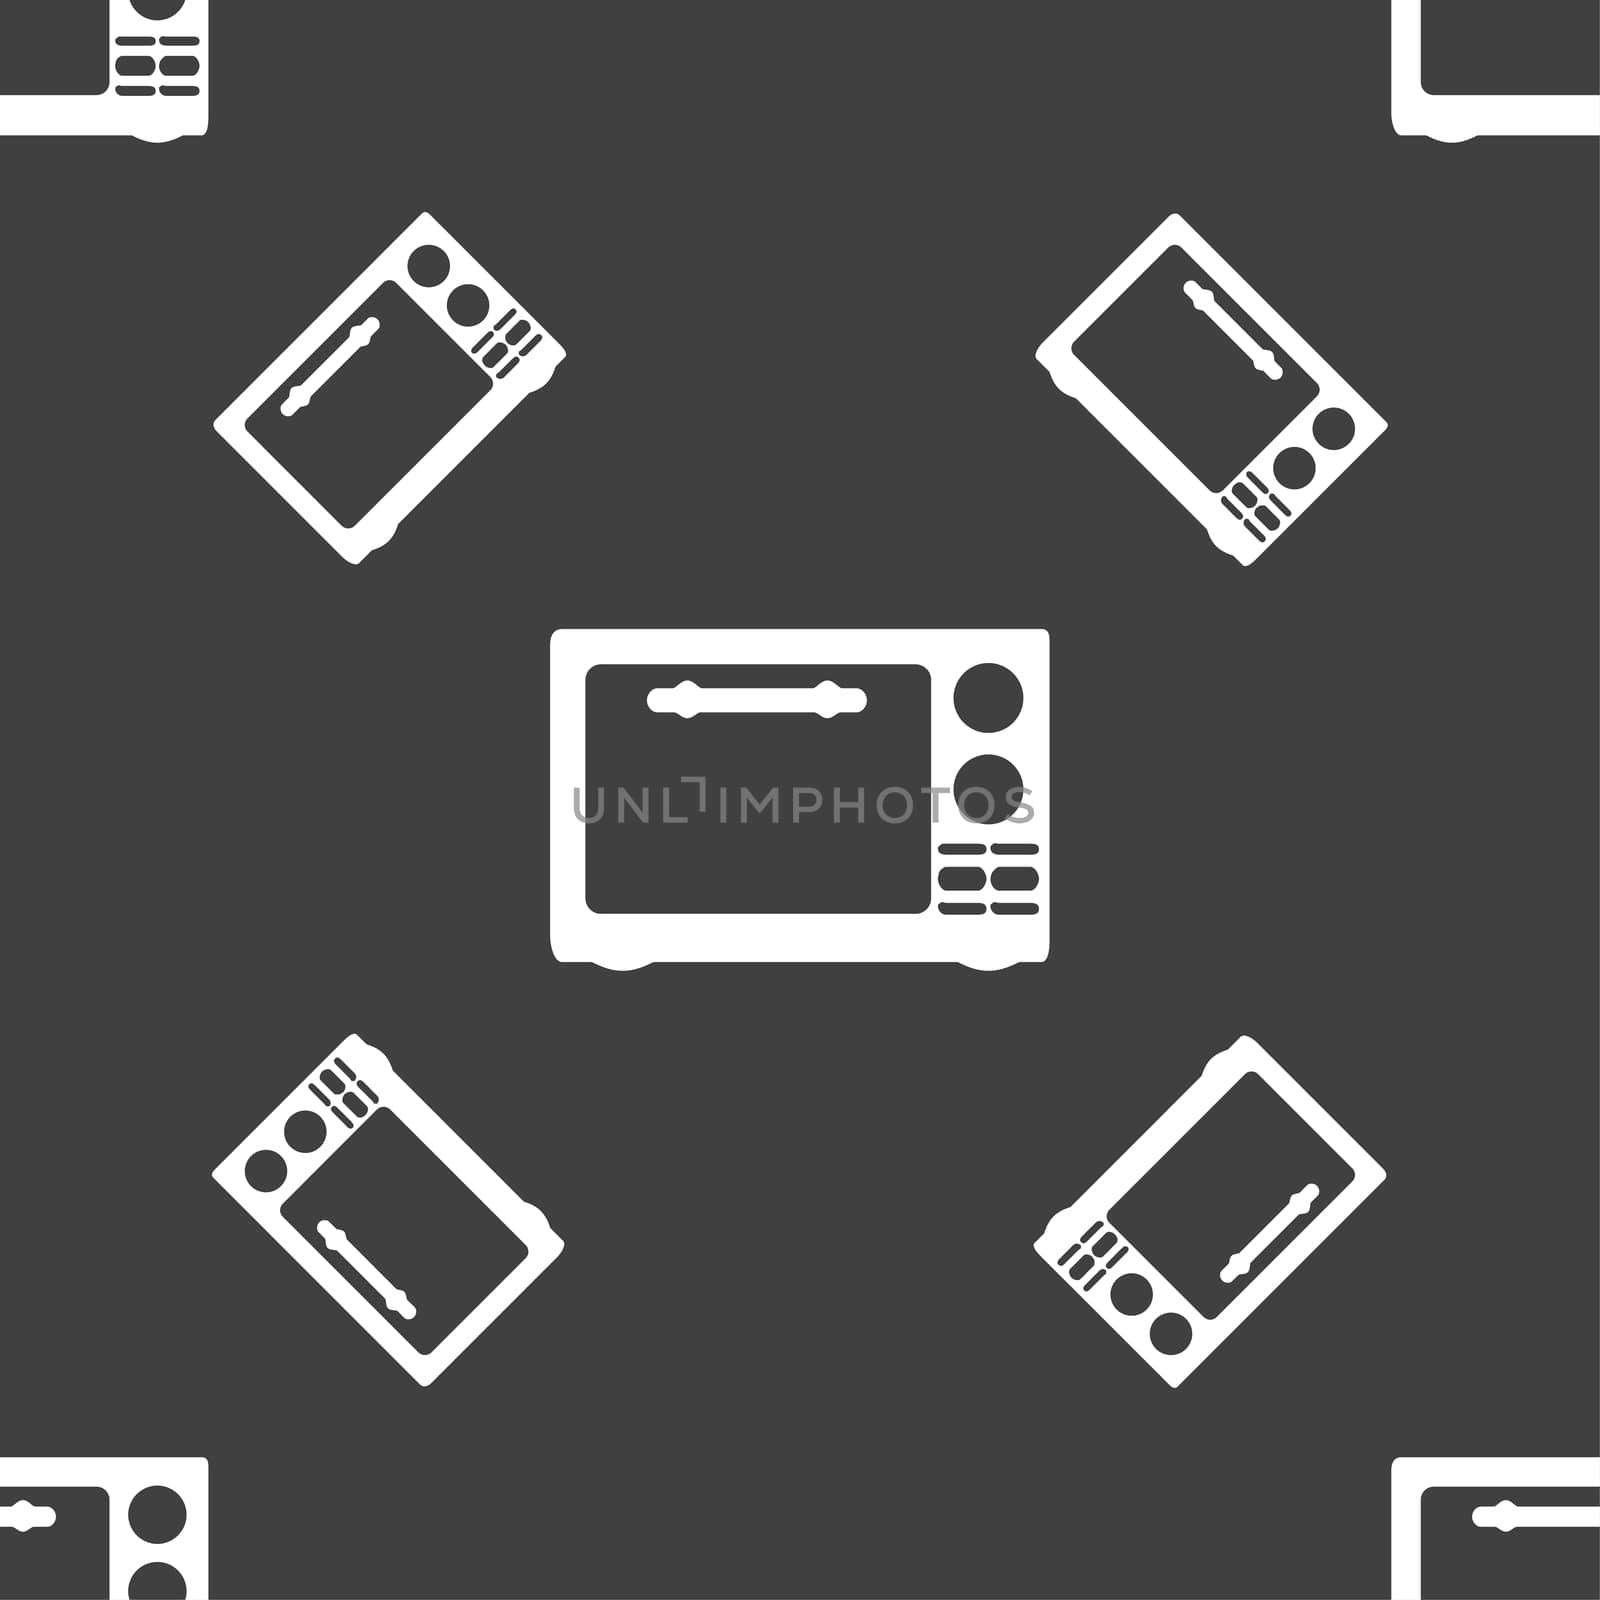 Microwave oven sign icon. Kitchen electric stove symbol. Seamless pattern on a gray background. illustration